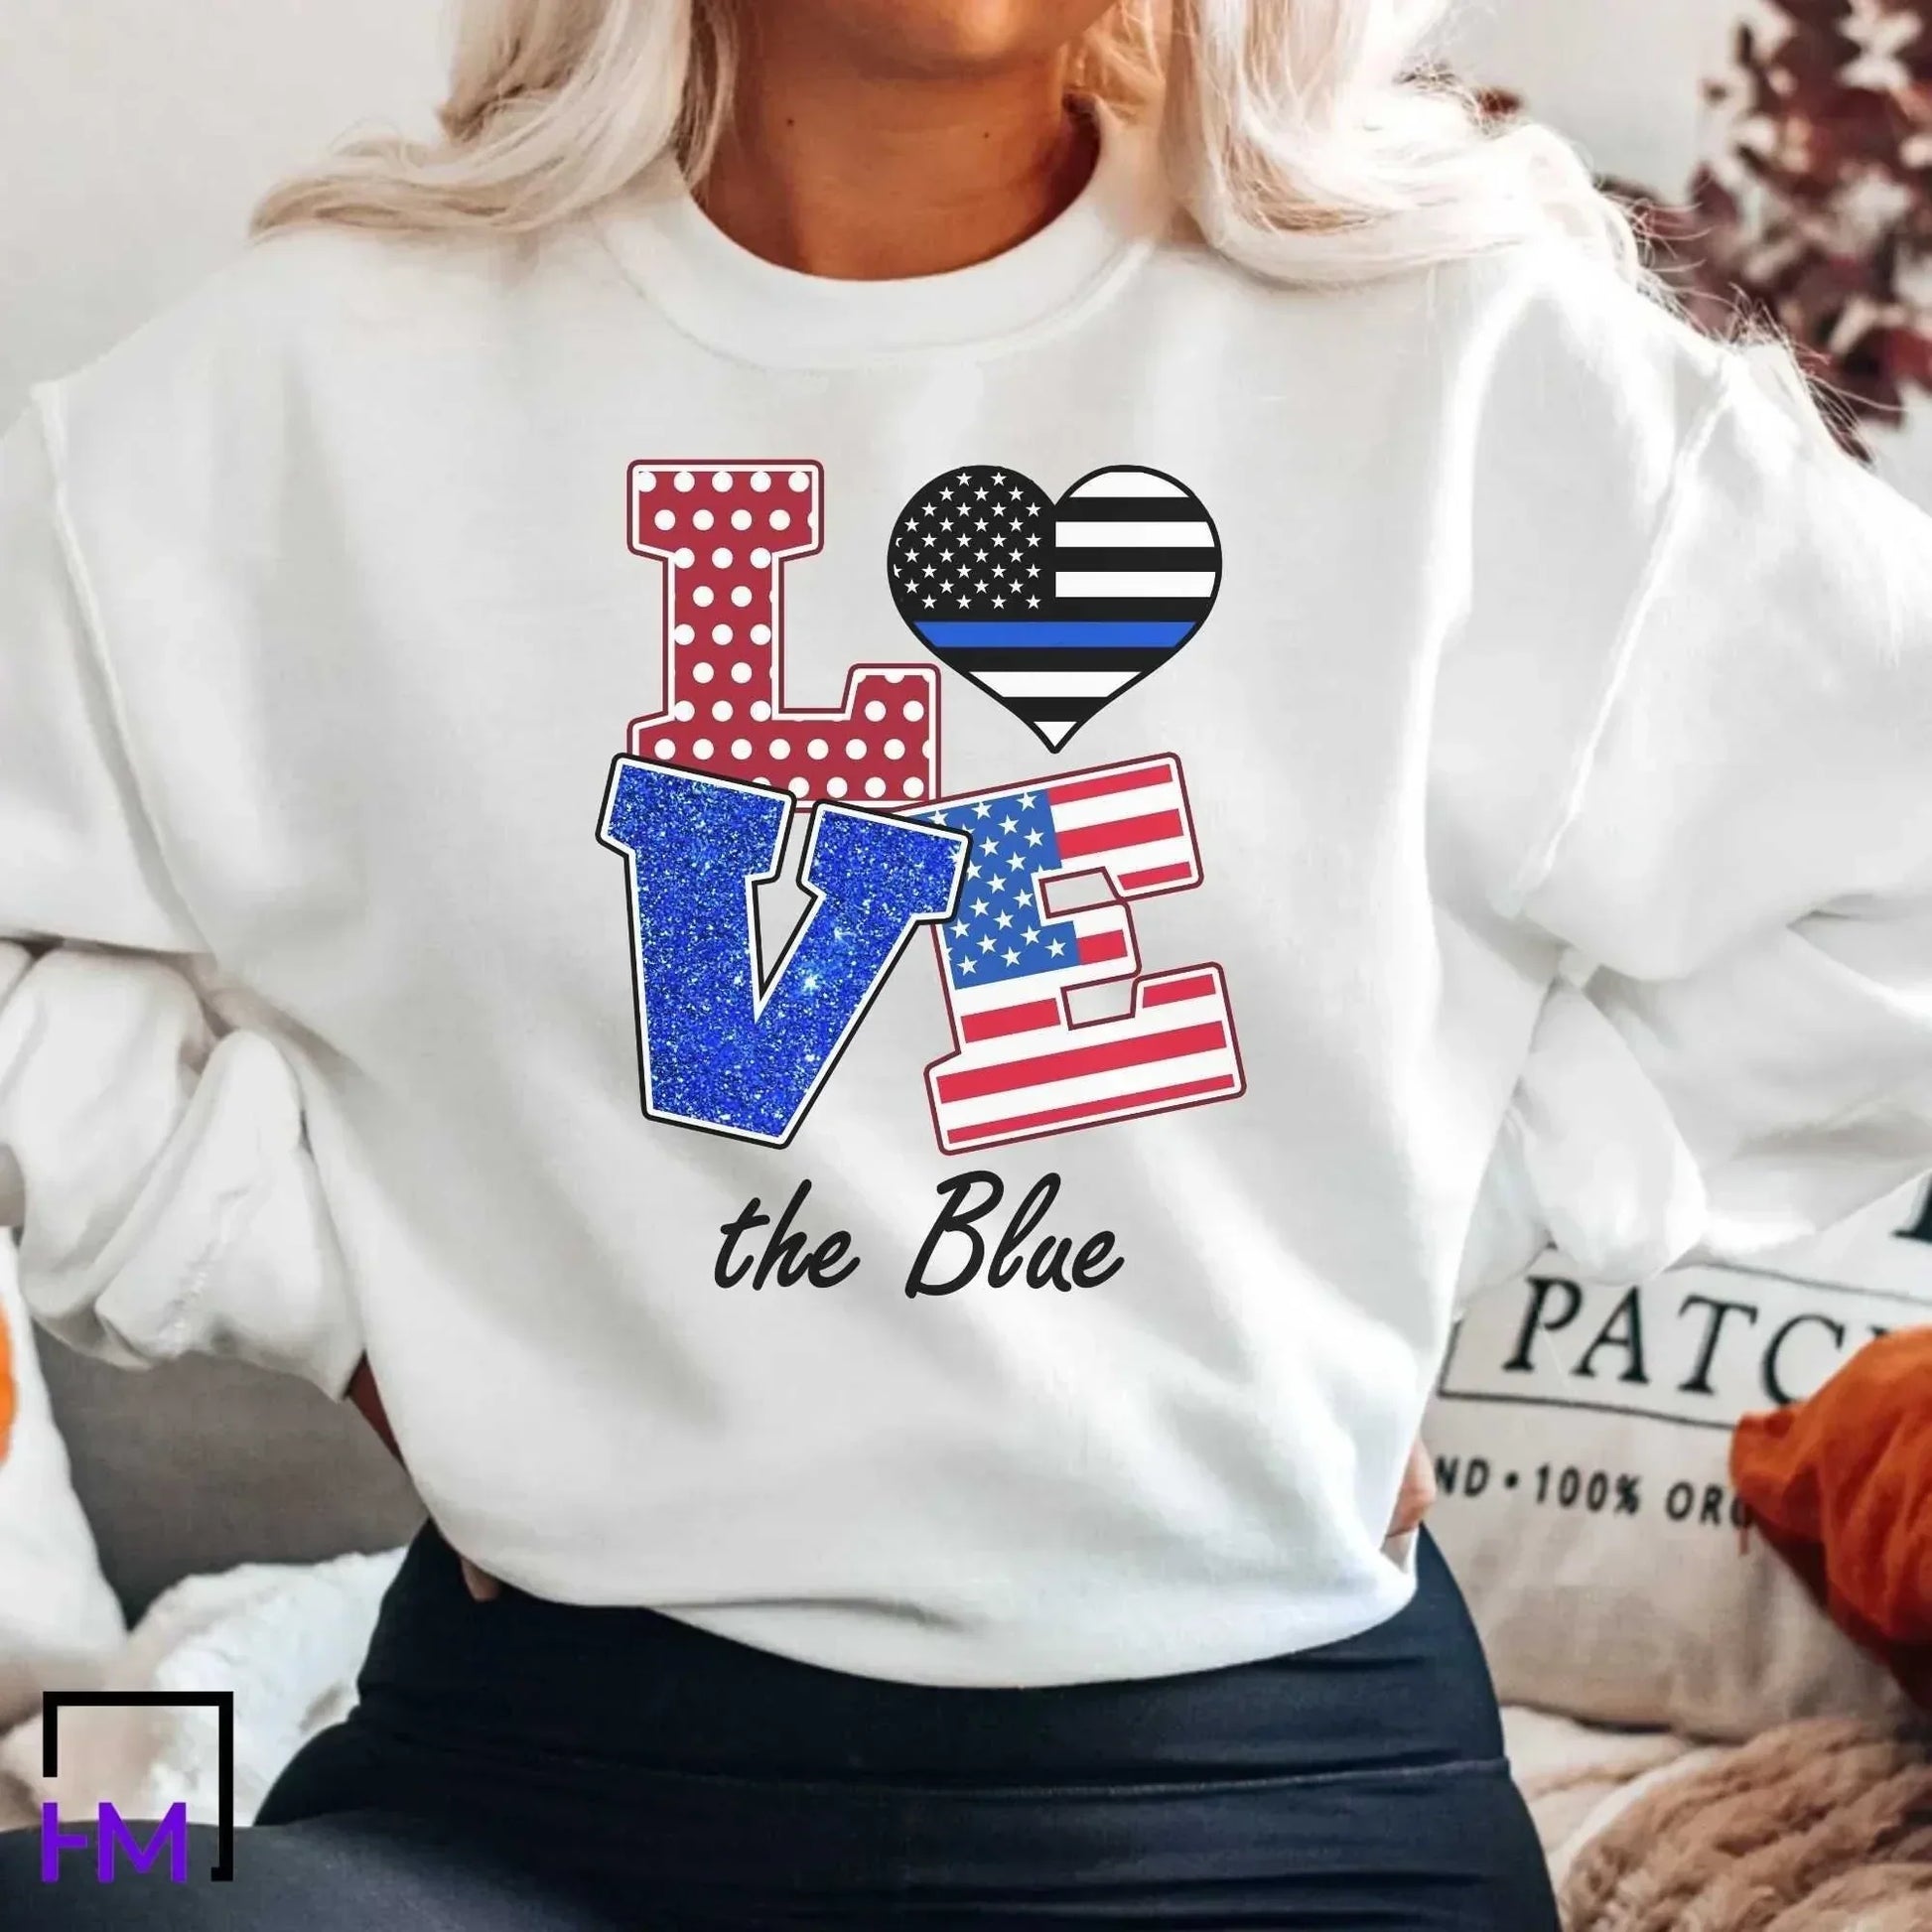 Police Shirt for Women, Police Wife Shirt, Police Academy Graduate Shirt, Policemen Mom Gift, Back the Blue Sweater, Gift for Police Officer